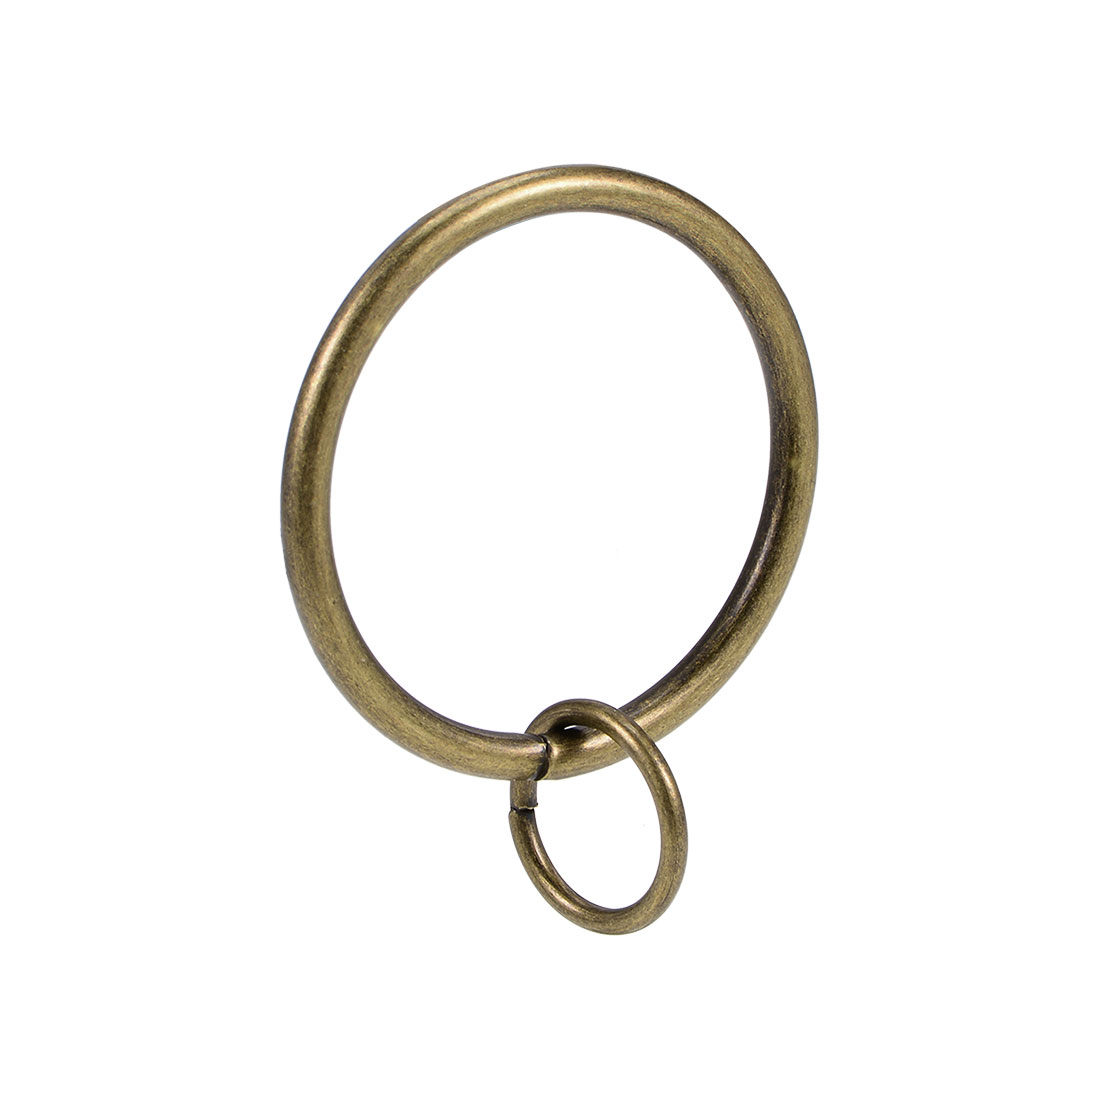 Unique Bargains Curtain Rings Metal 37mm Inner Dia Drapery Ring for Curtain Rods Bronze 28 Pcs